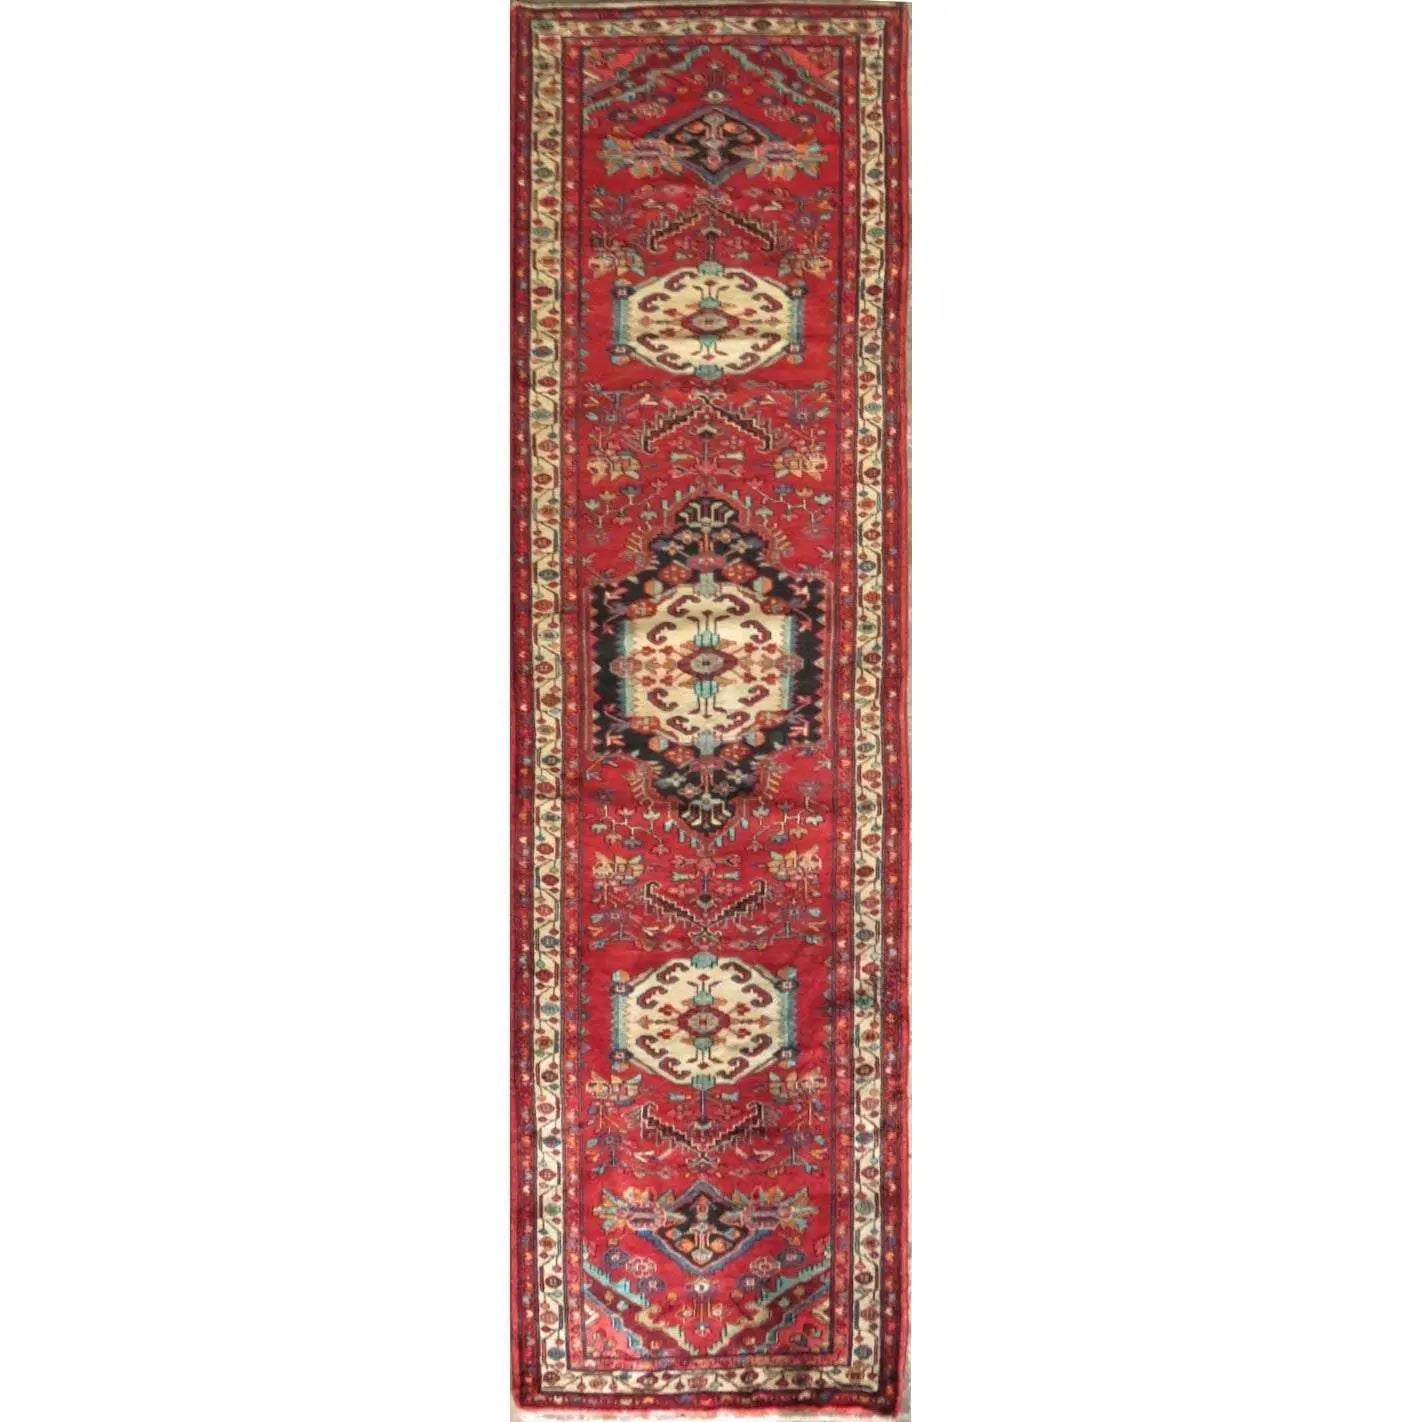 Hand-Knotted Persian Wool Rug _ Luxurious Vintage Design, 13'1" x 3'3", Artisan Crafted